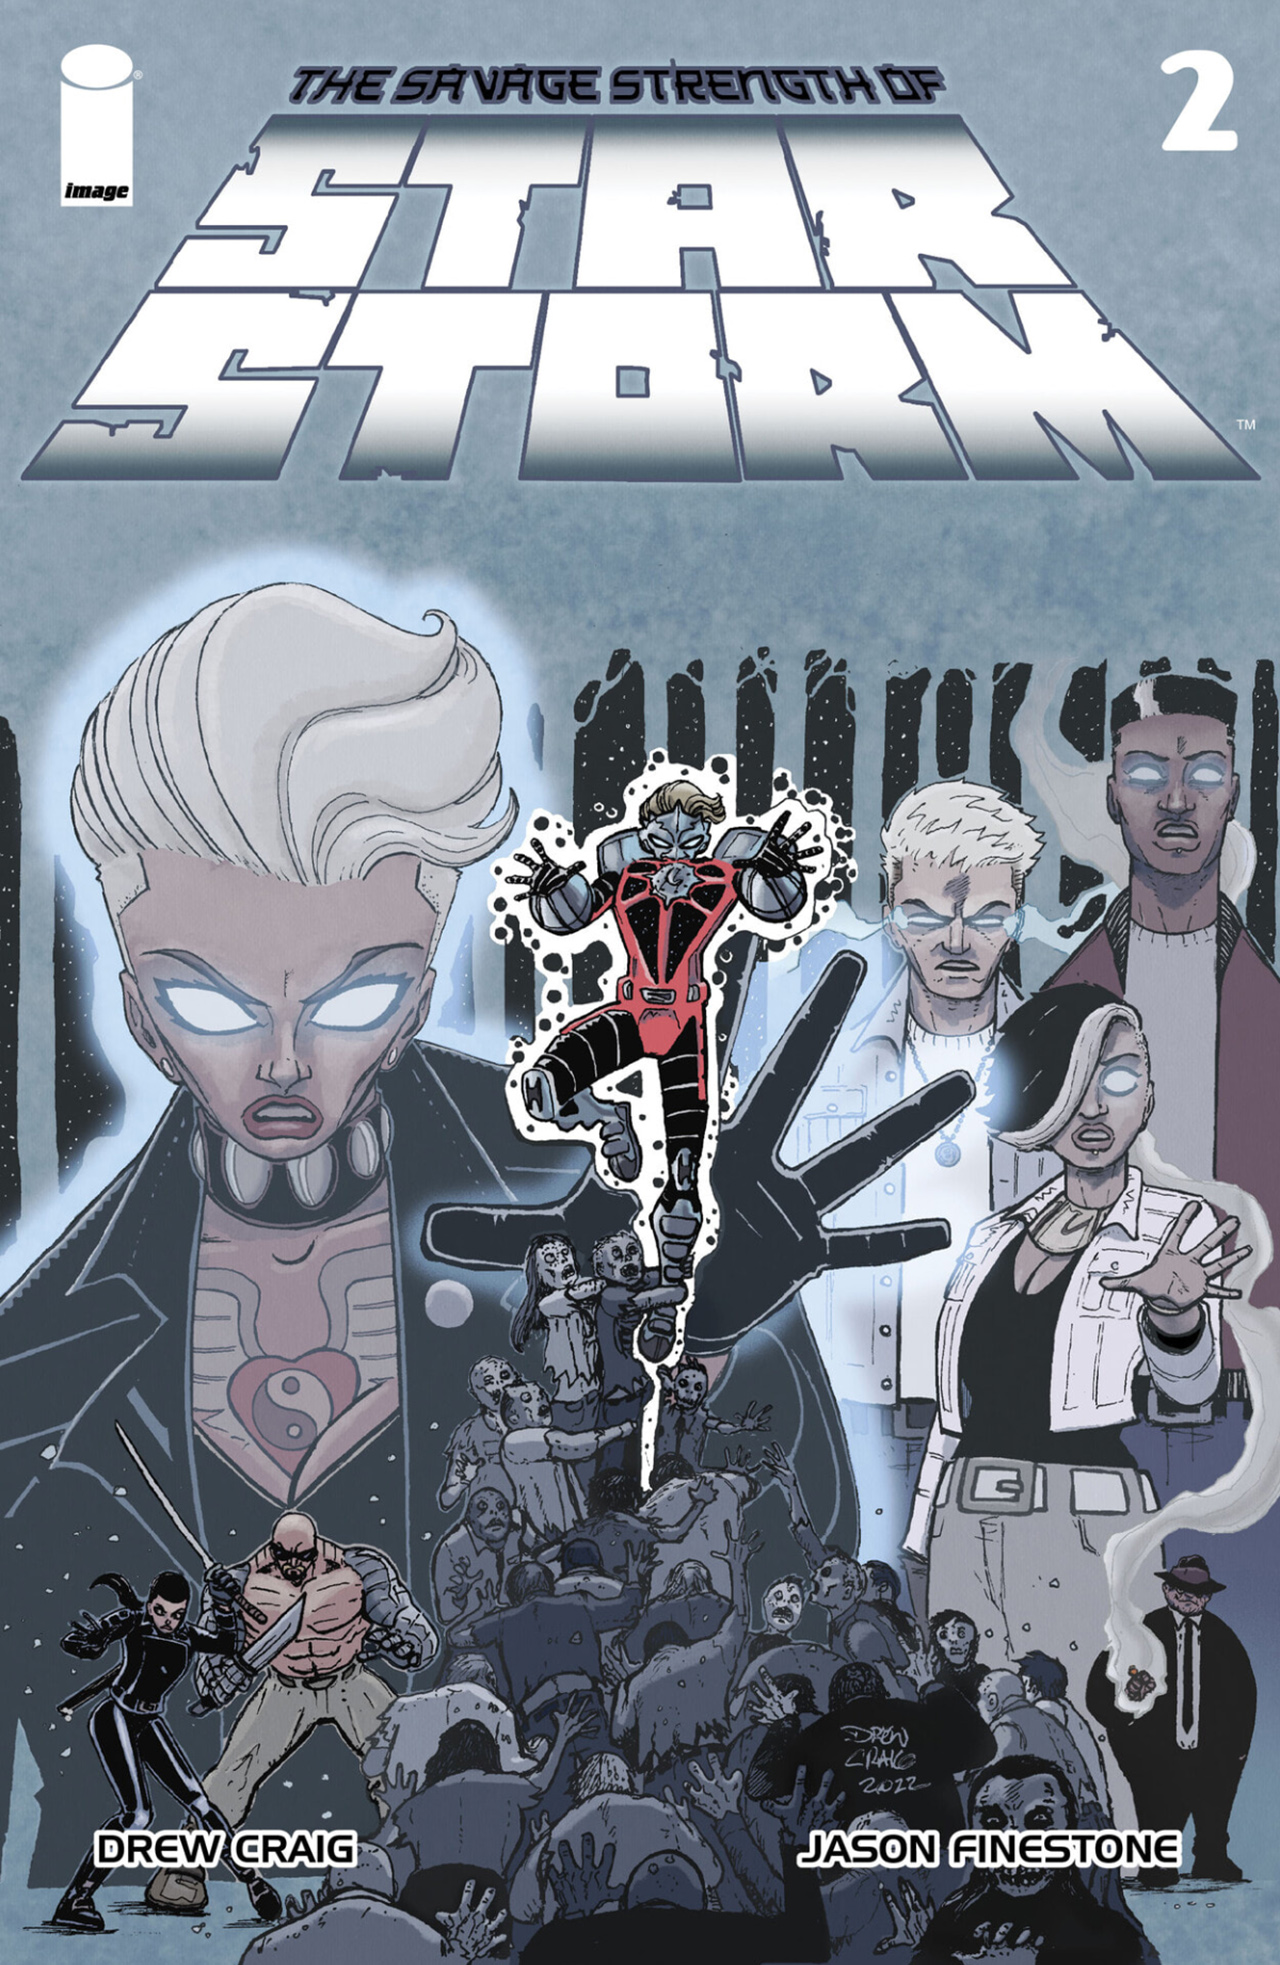 Read online The Savage Strength of Starstorm comic -  Issue #2 - 1